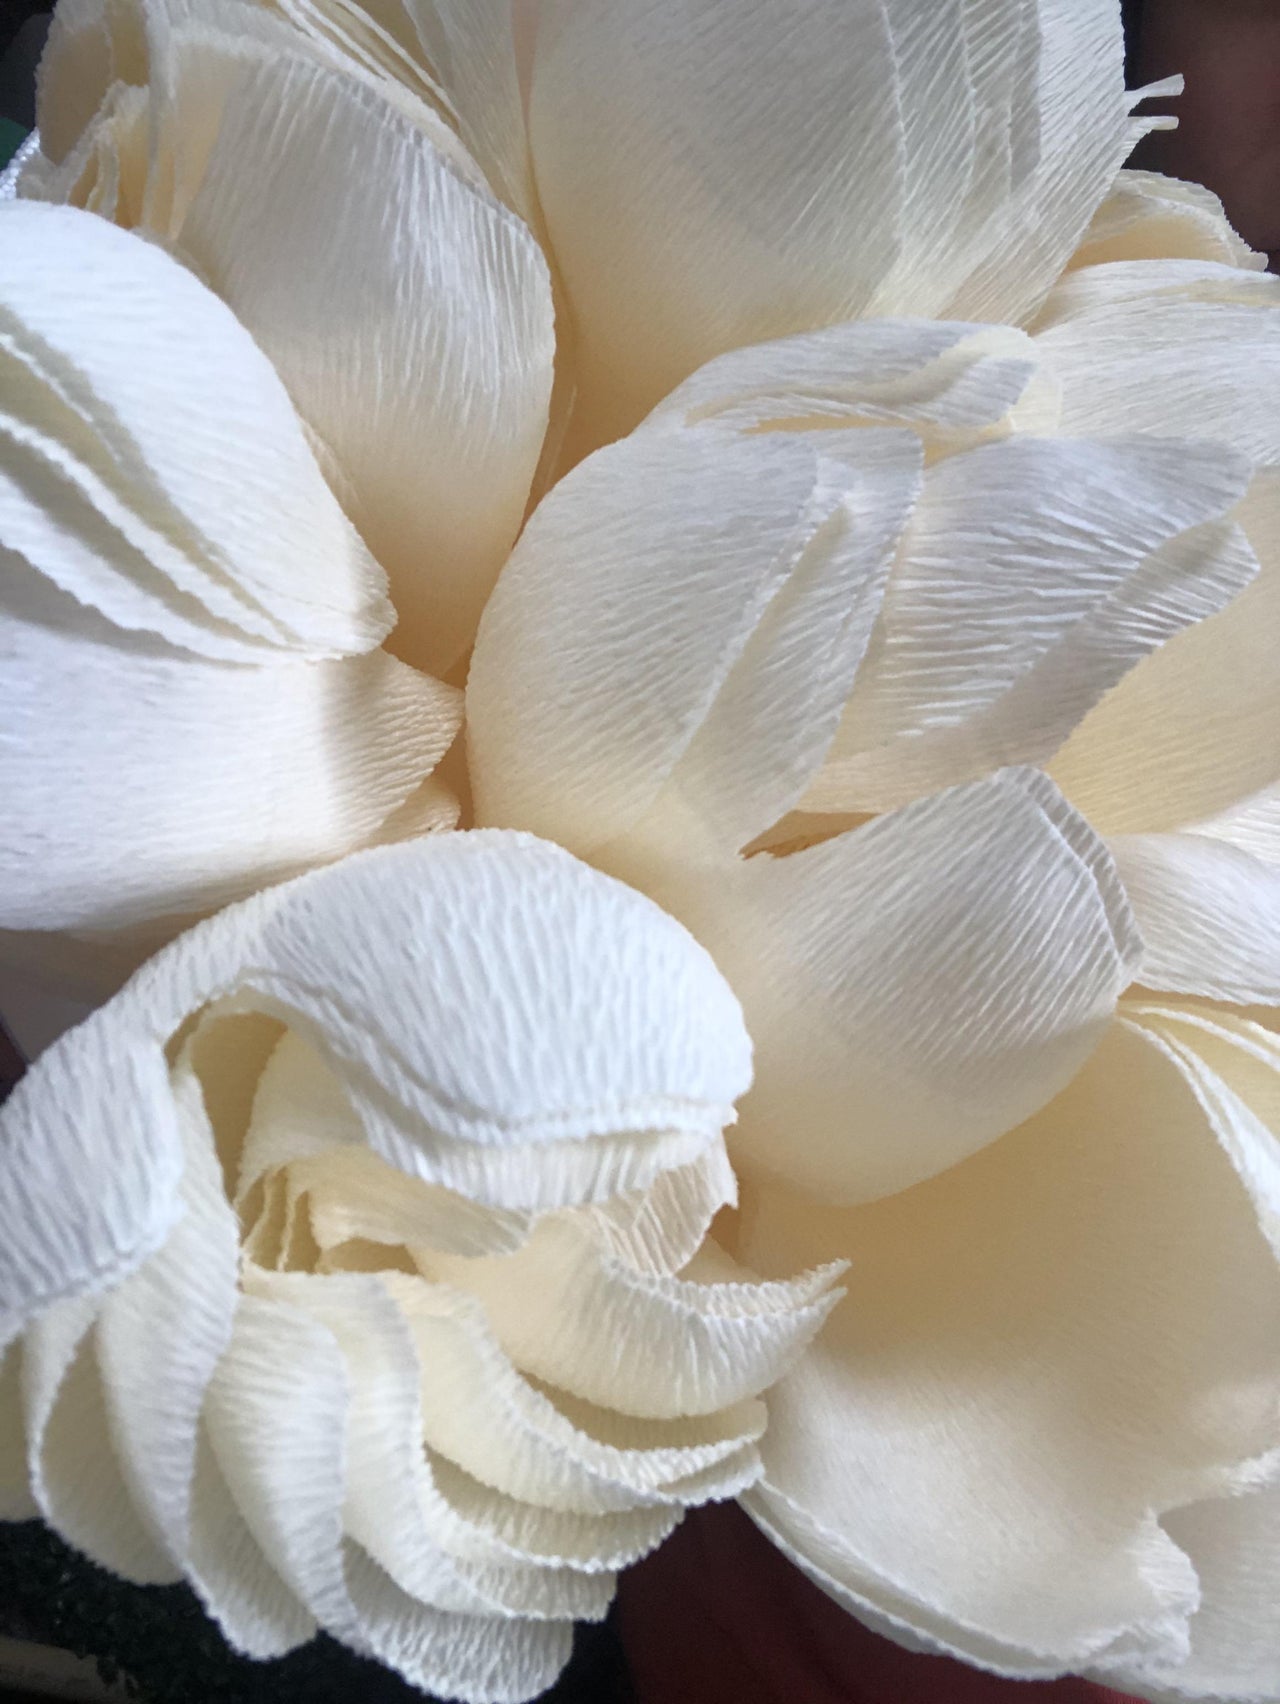 Giant Paper Flowers and Luxury Fashion